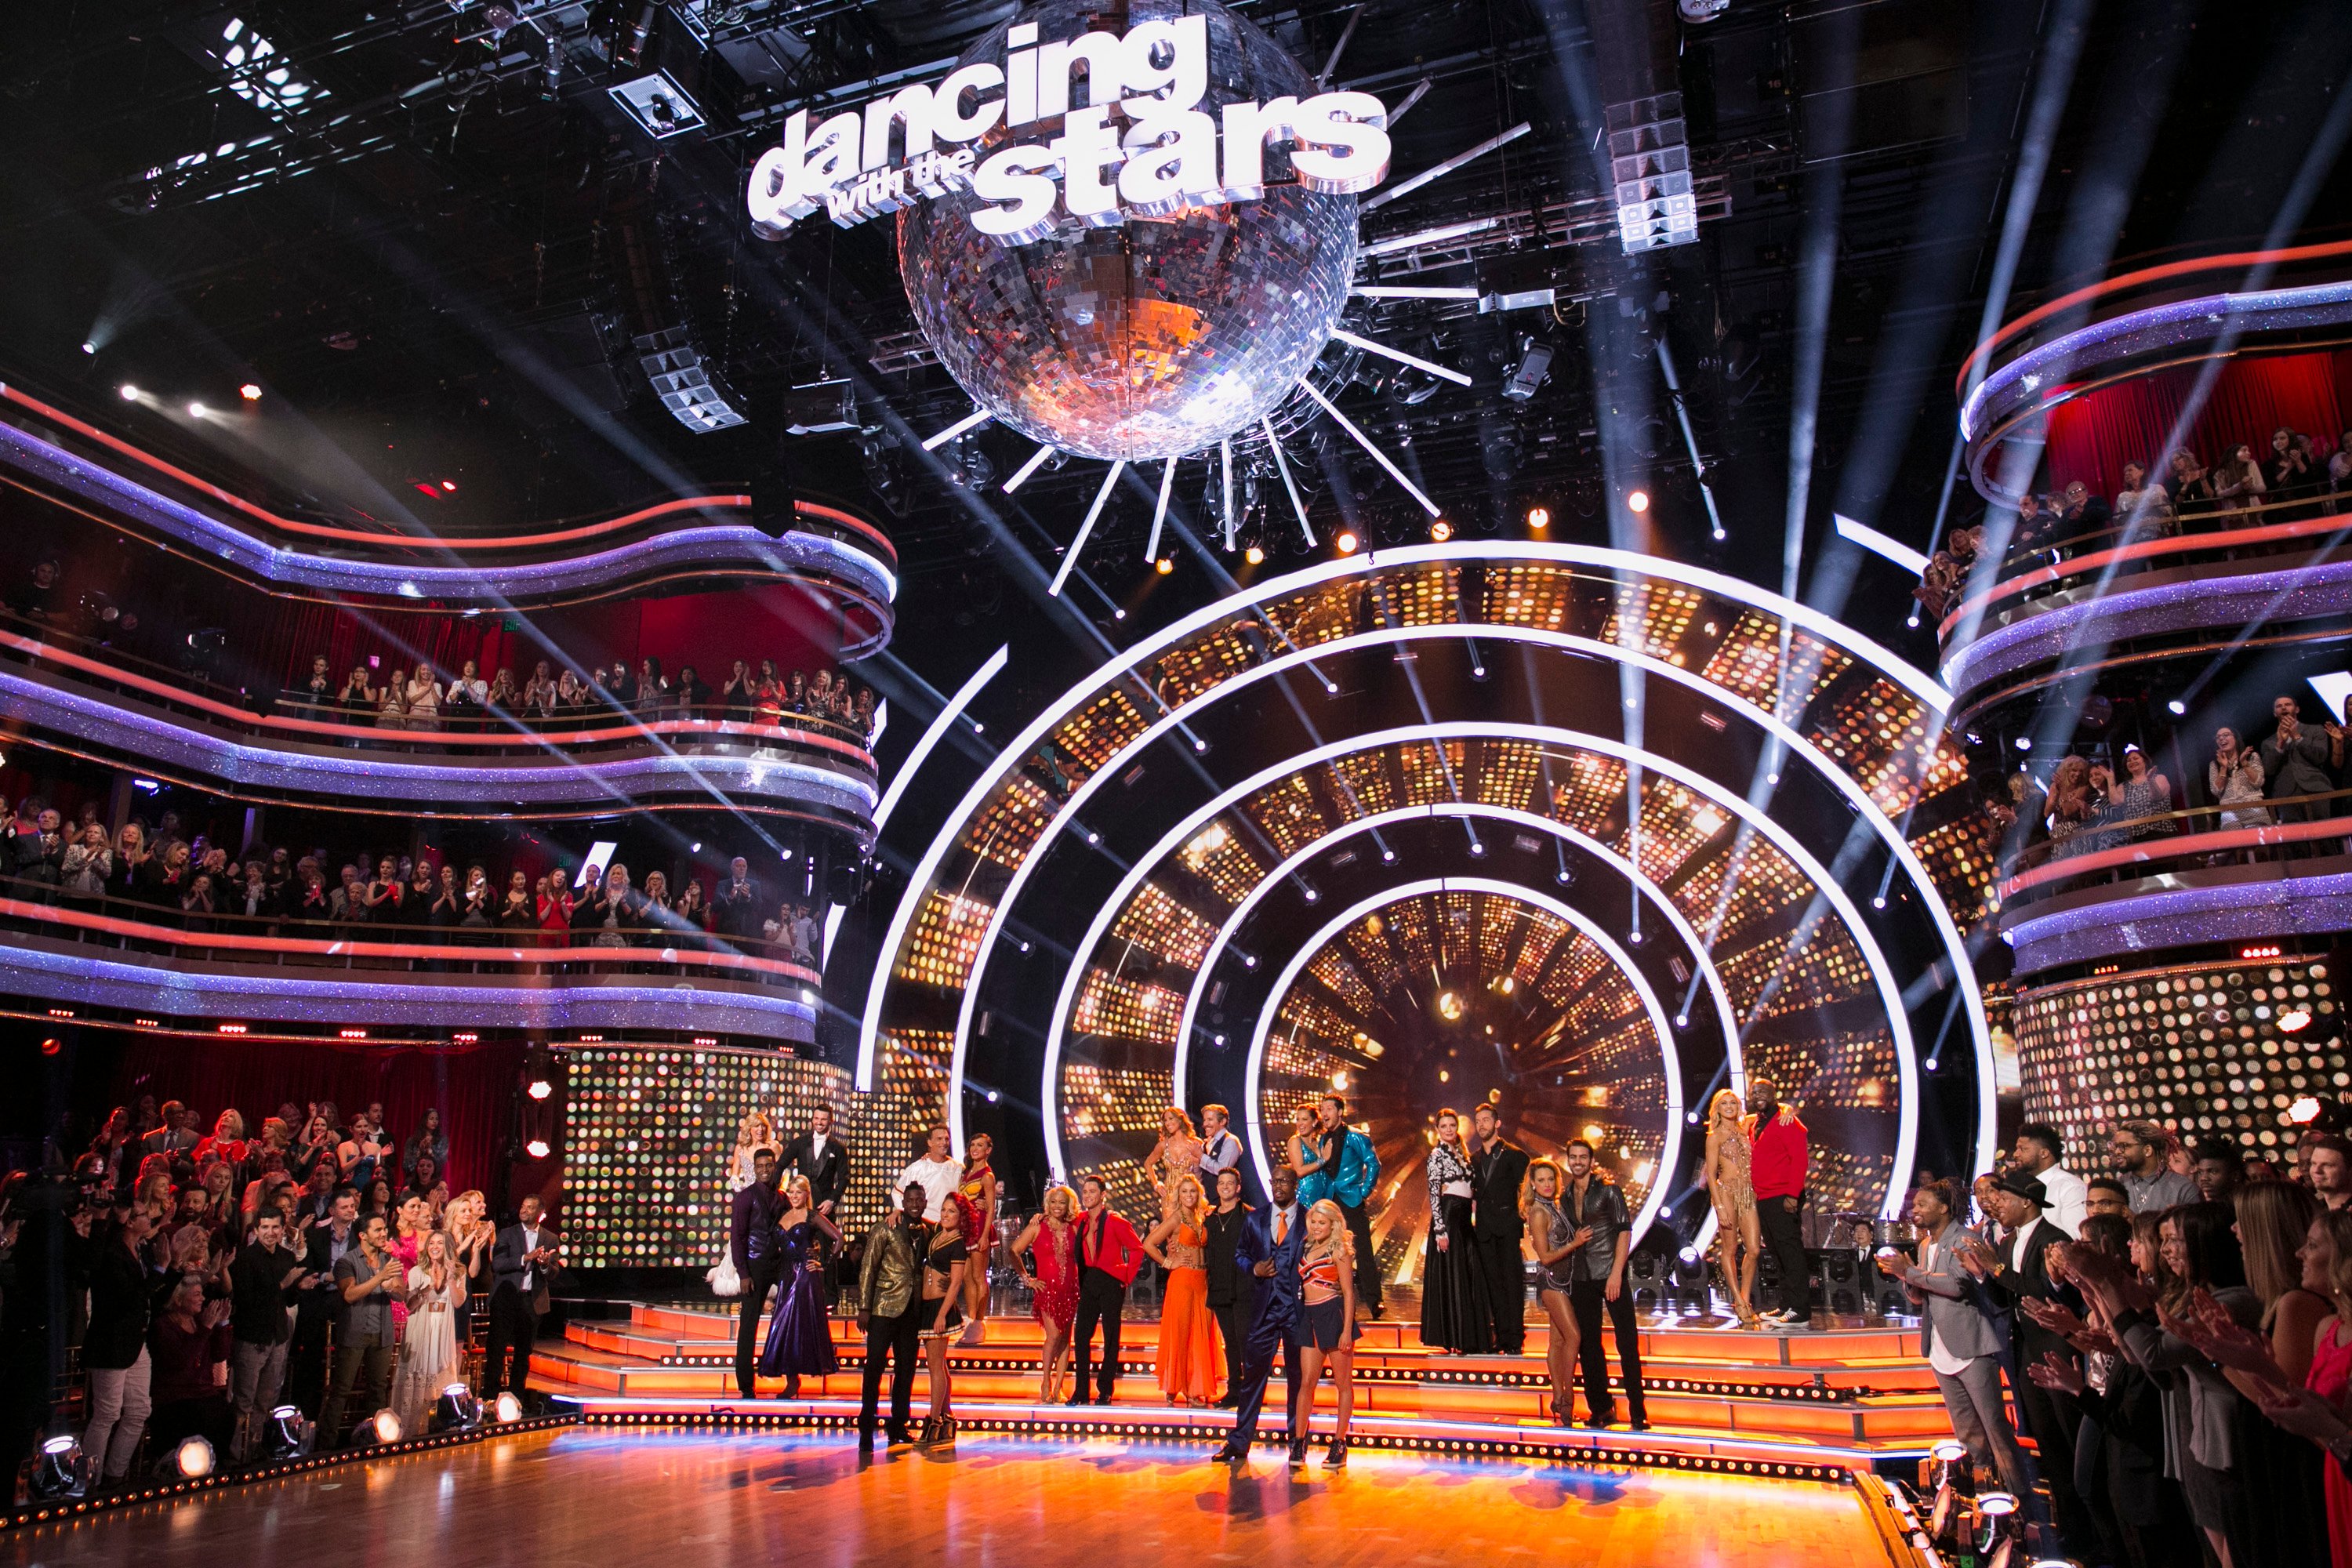 'Dancing with the Stars' casting for season 22 standing in the ballroom during the season premiere